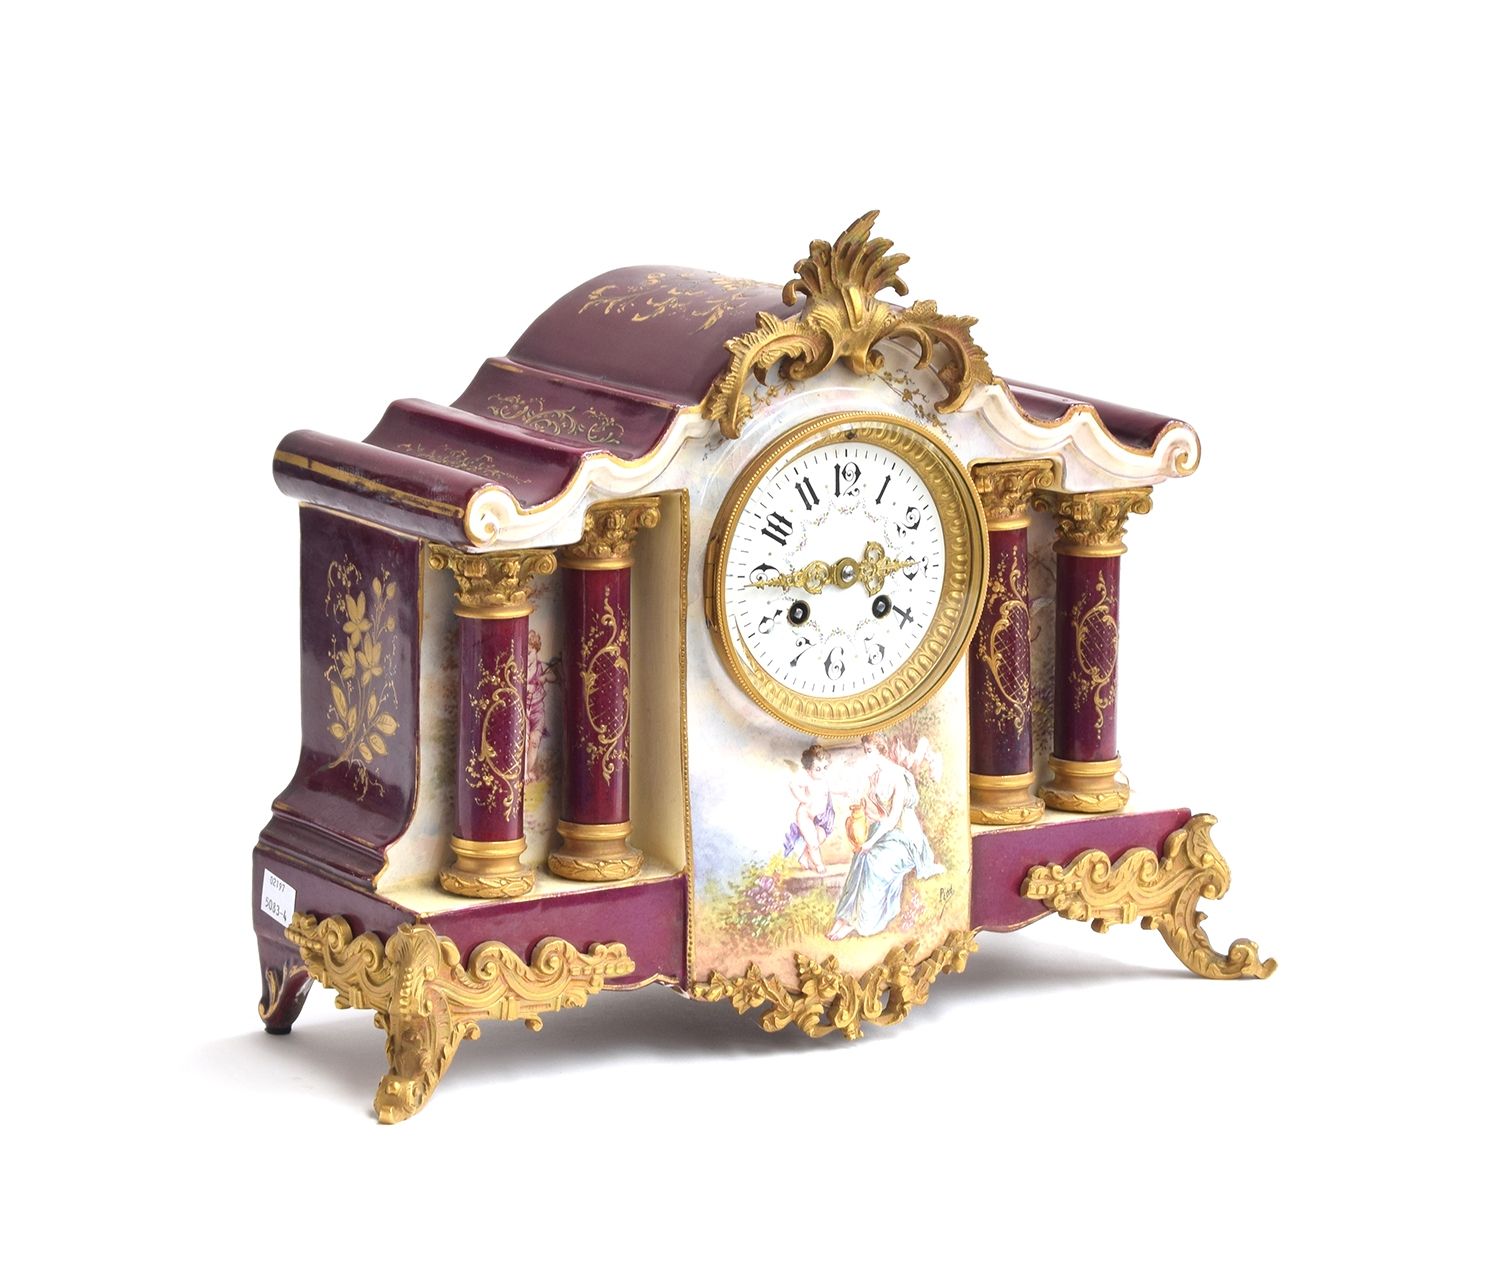 A 19th century French ormolu and porcelain mantel clock, the movement by Japy Freres, striking on - Image 2 of 2